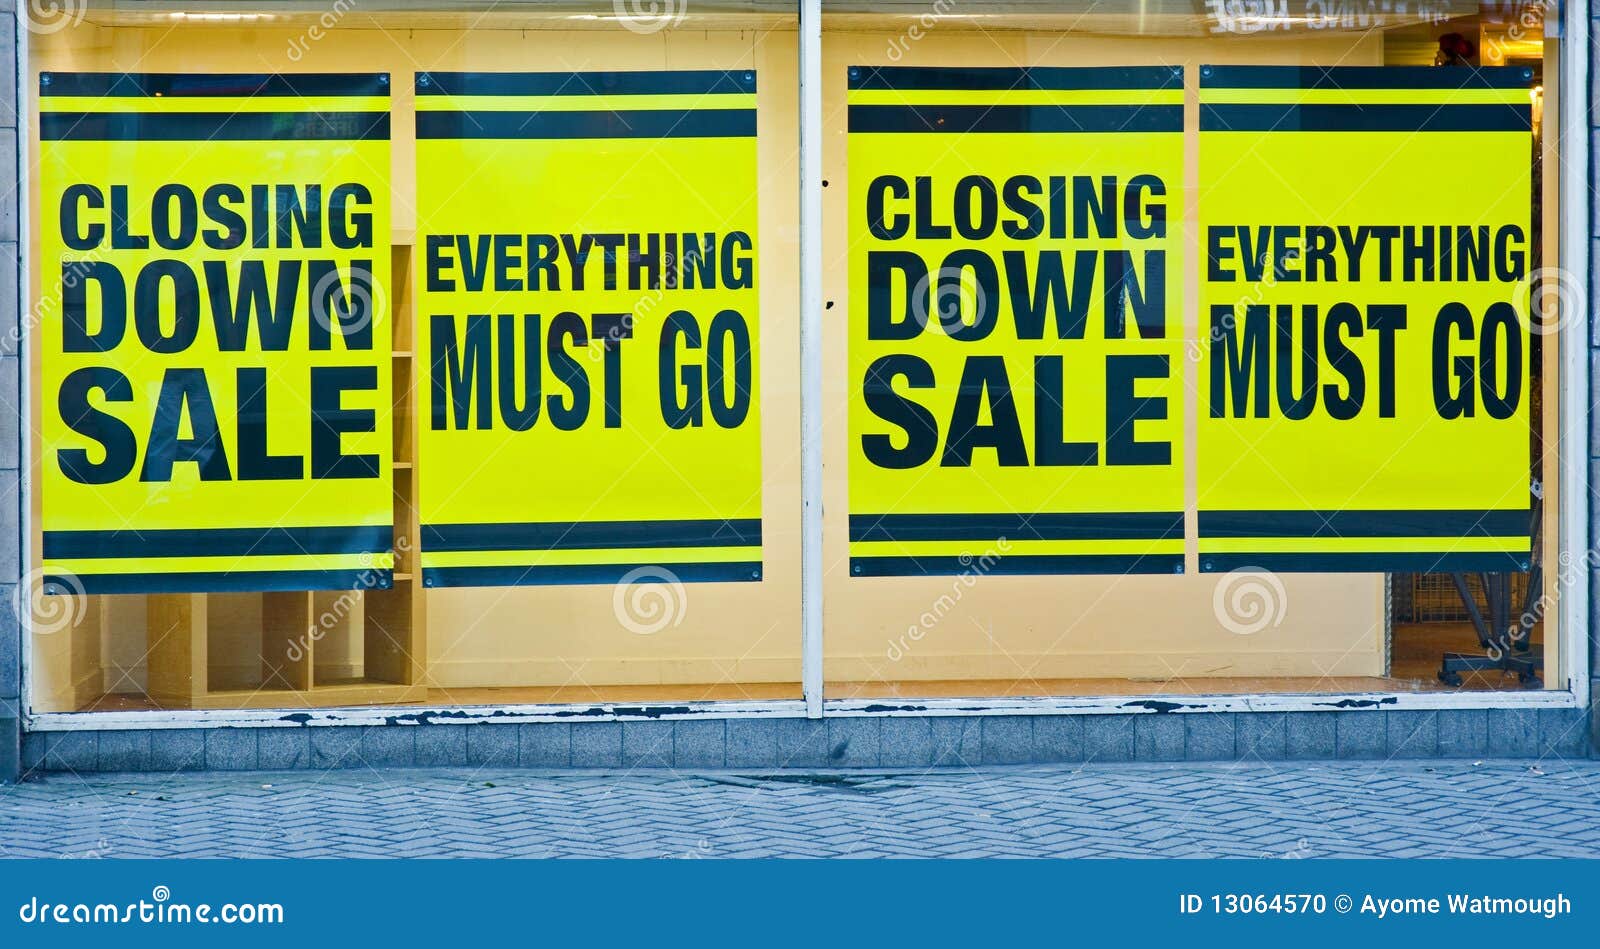 closing down: effects of recession.